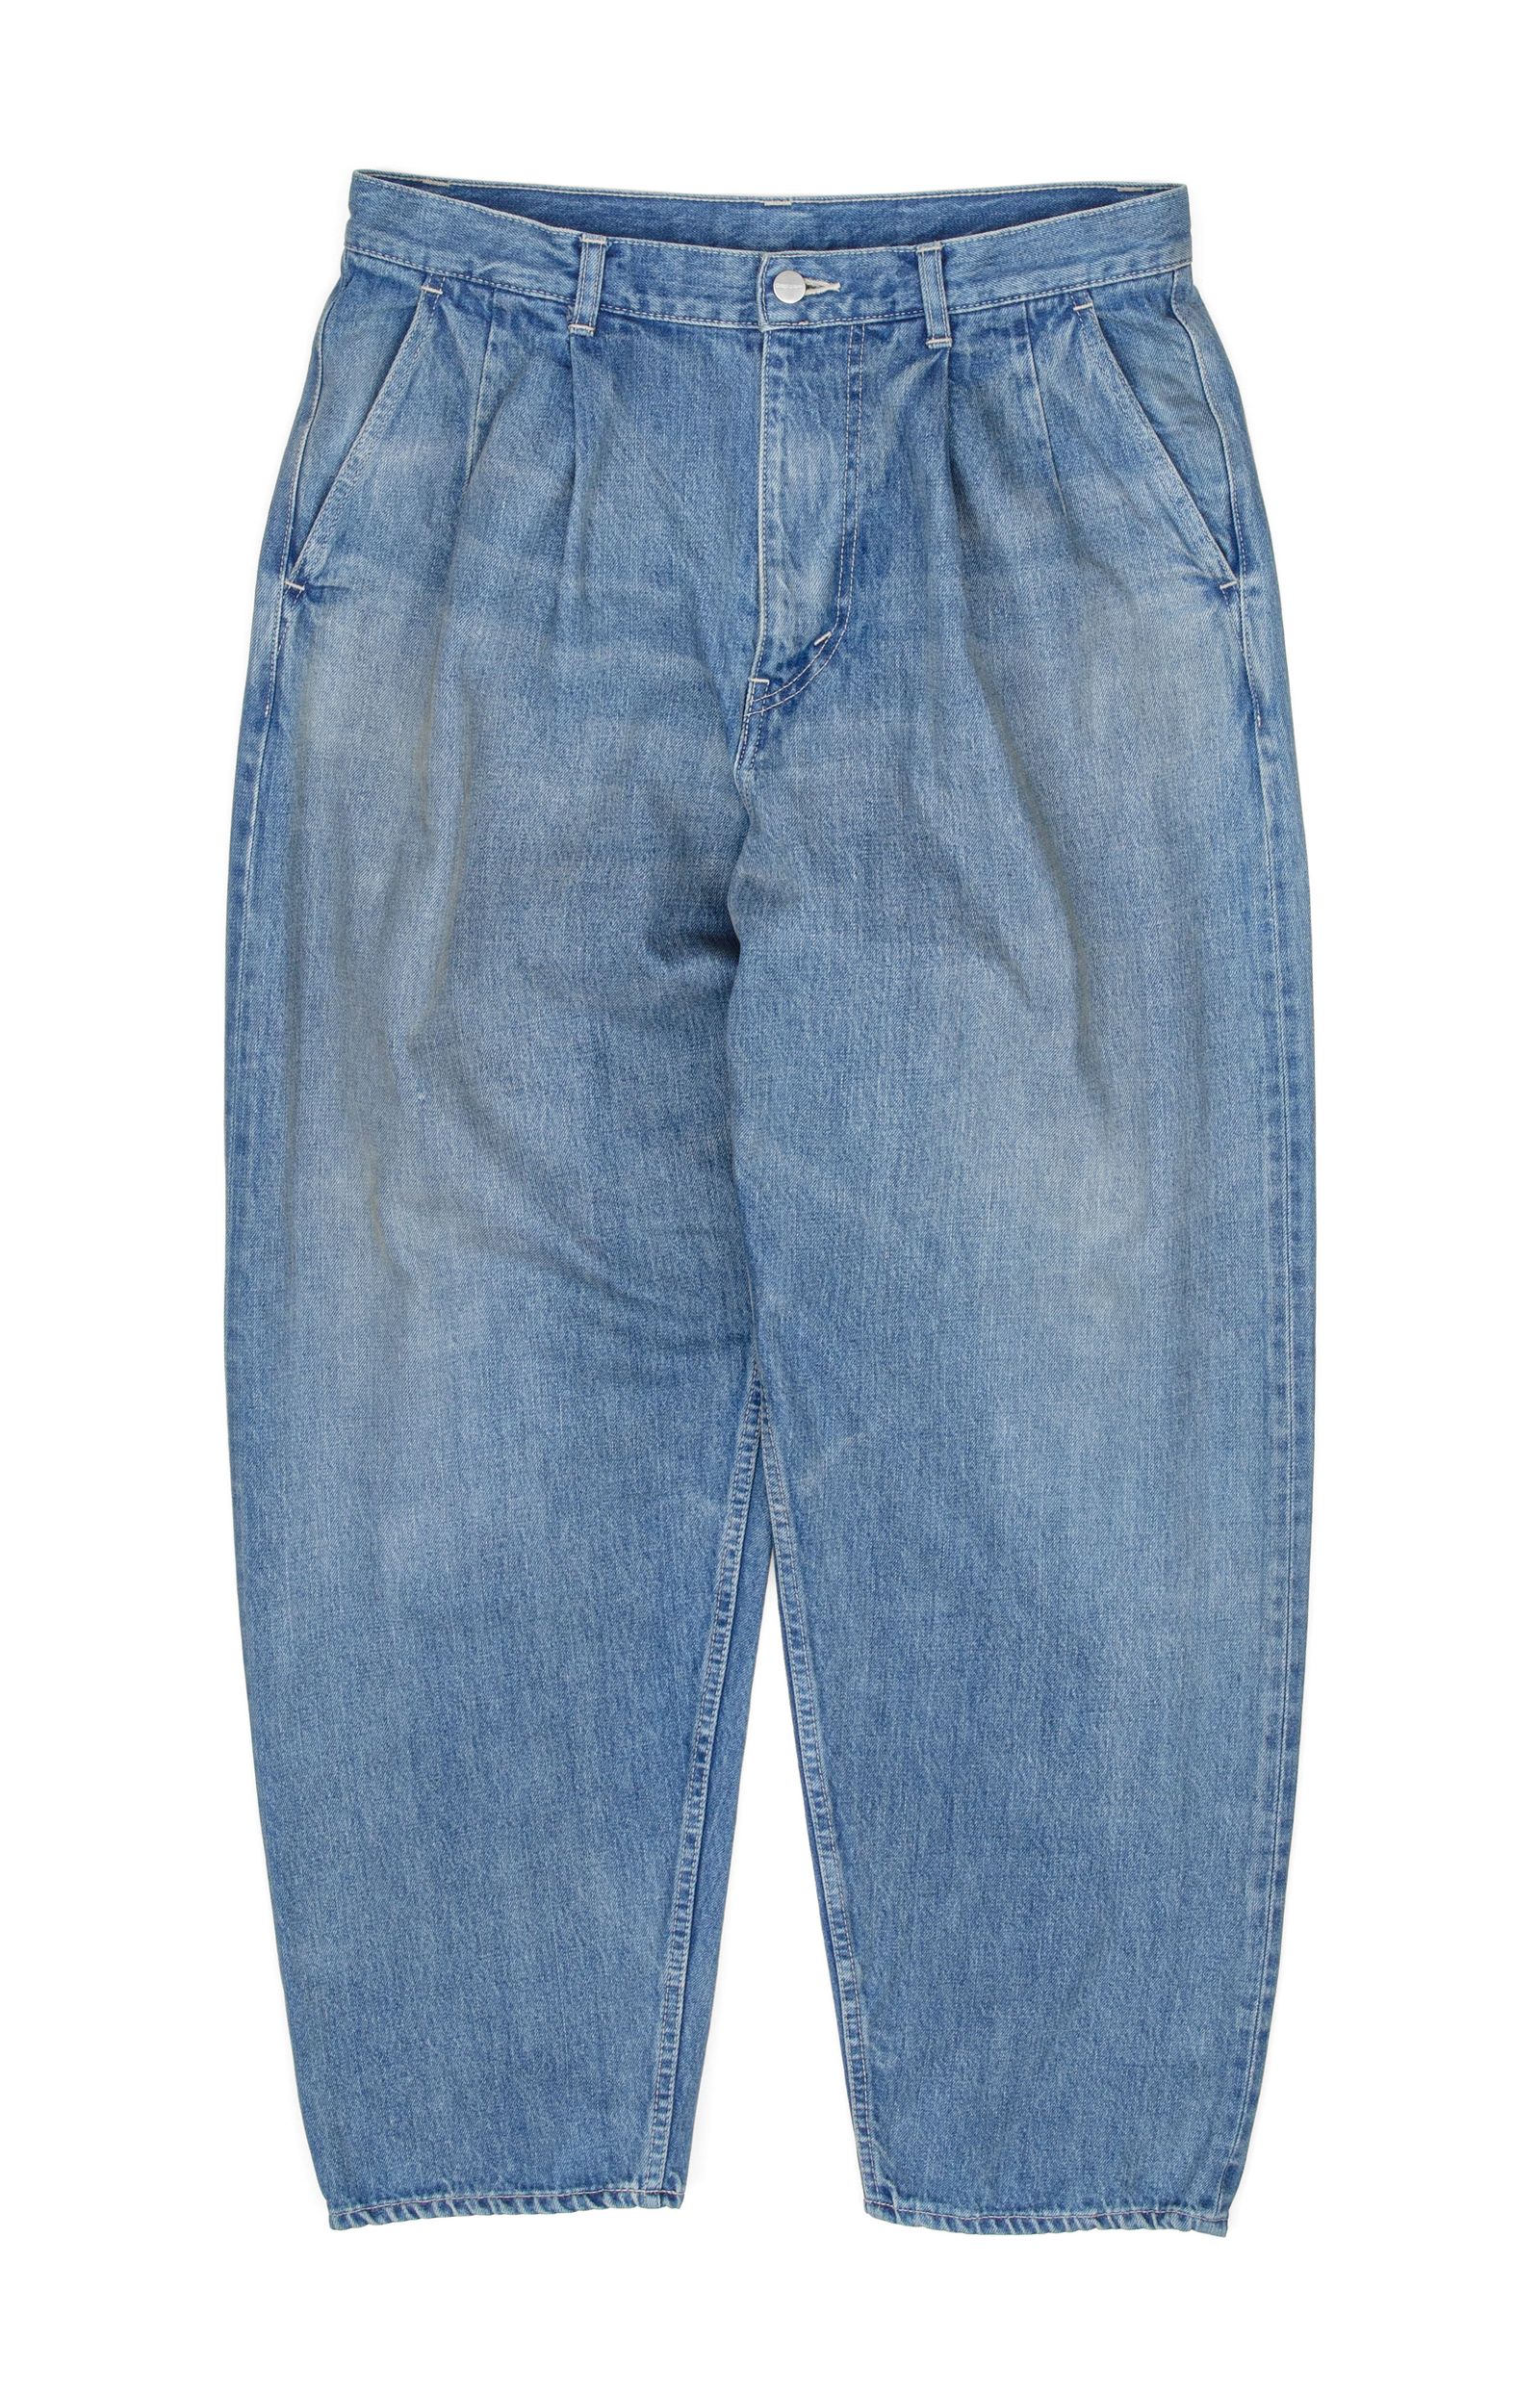 Graphpaper - Selvage Denim Two Tuck Tapered Pants / LIGHT FADE